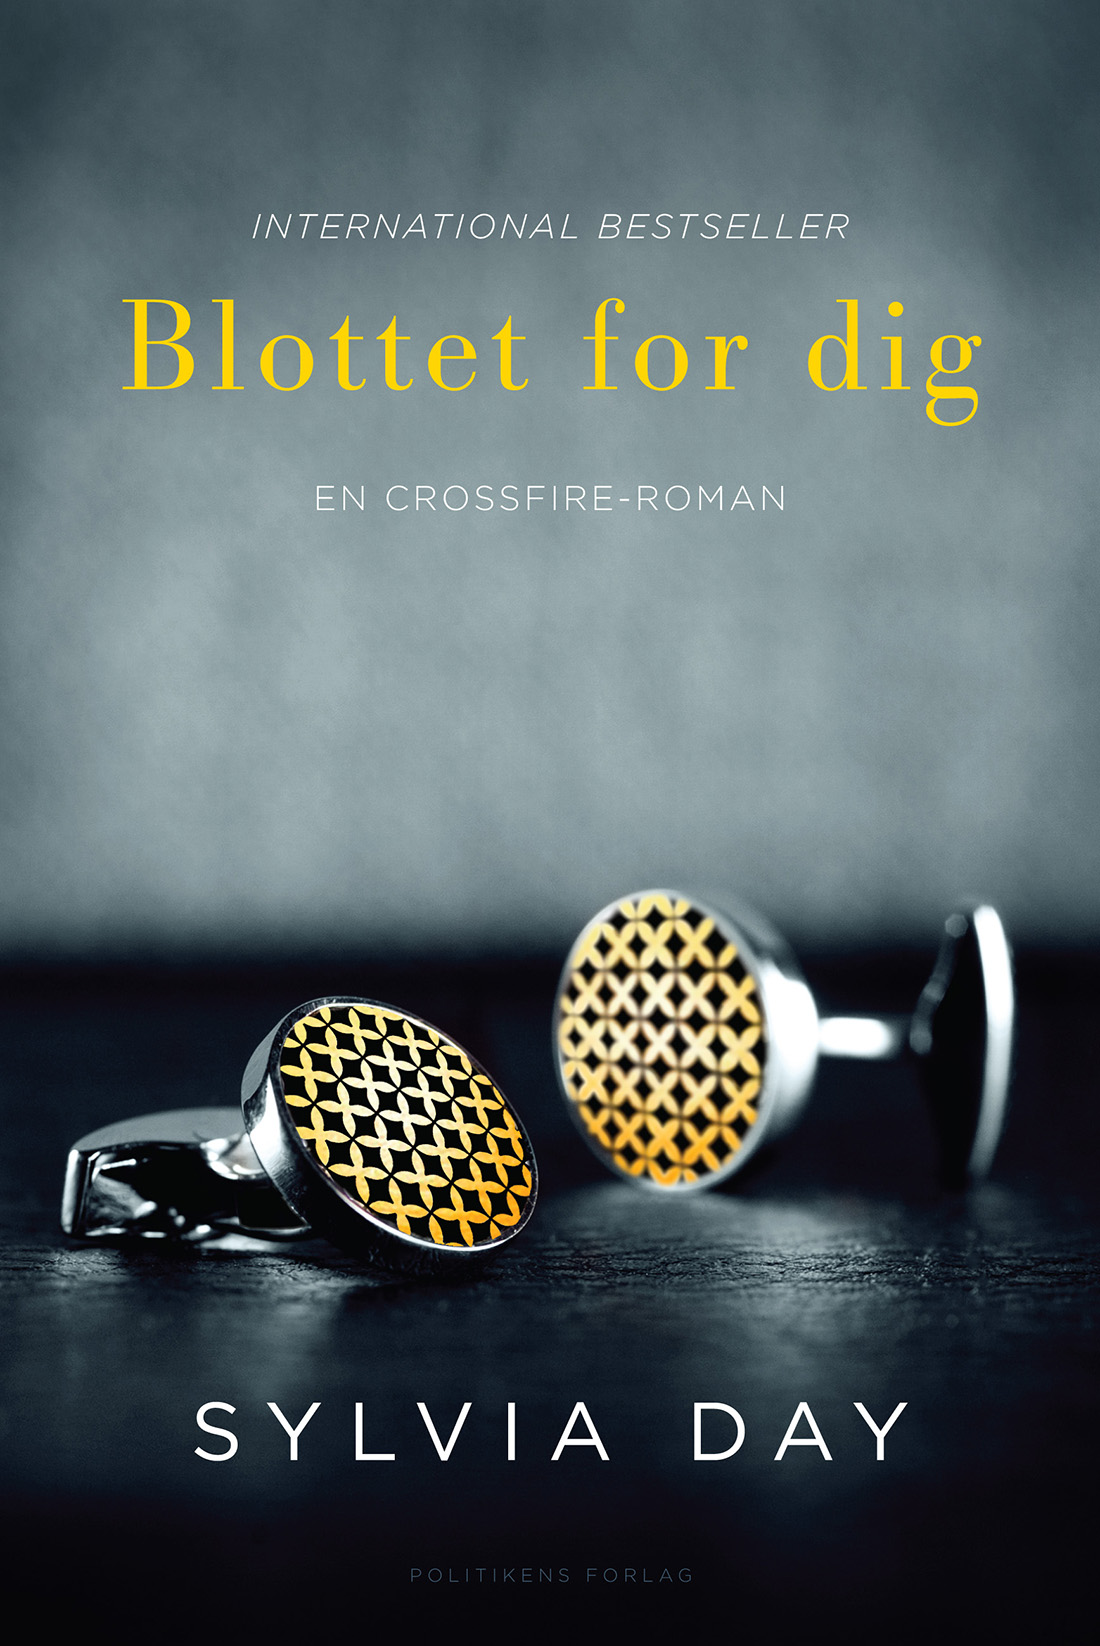 Sylvia Day - Blottet for dig